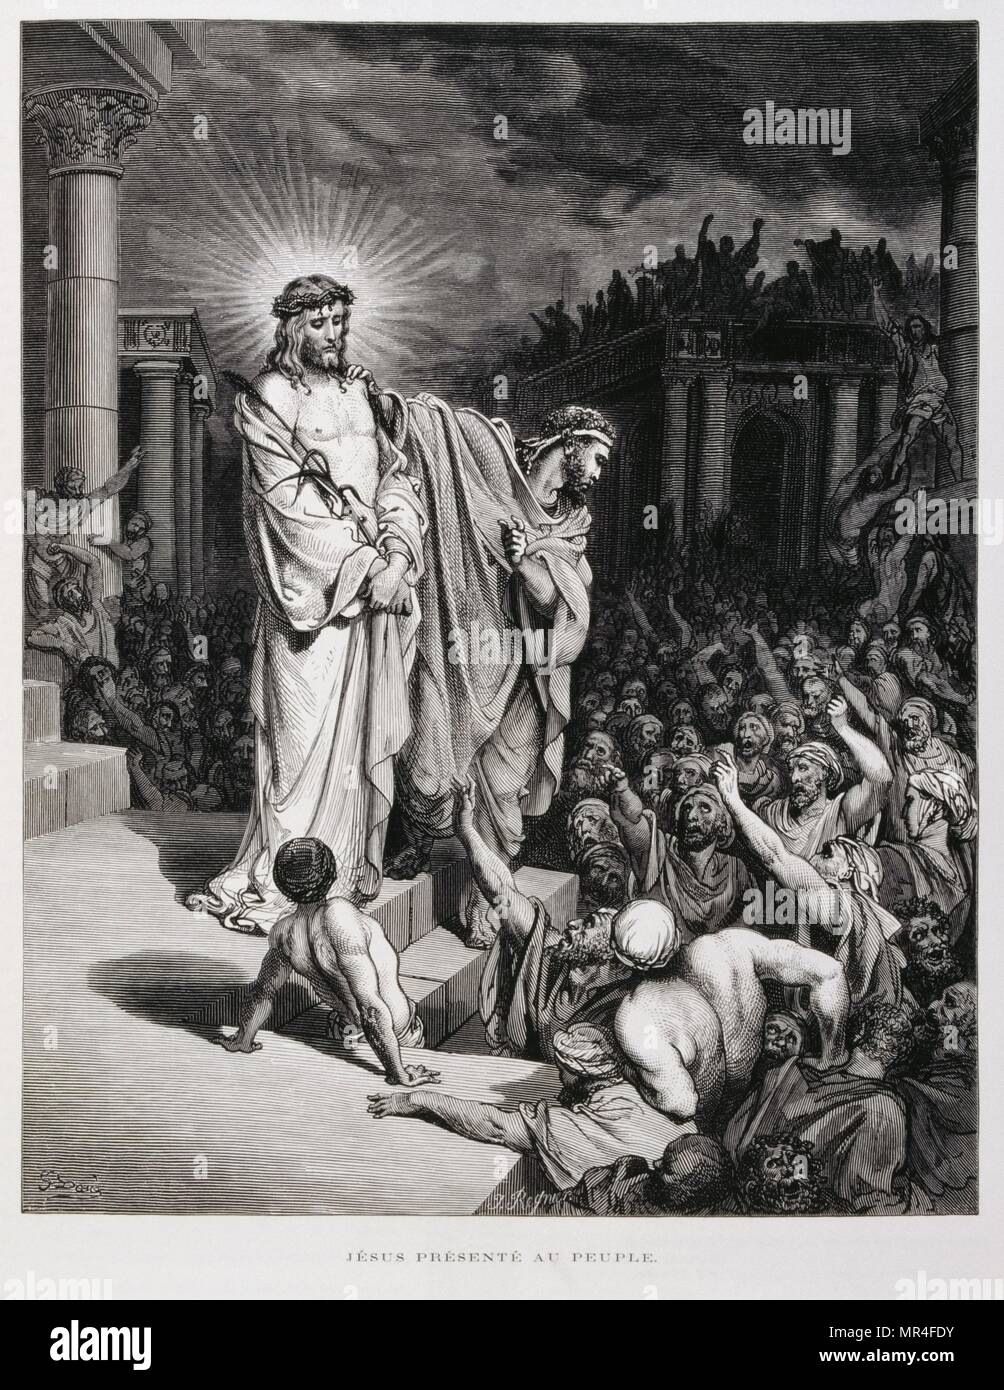 Jesus presented to the people during his trial, Illustration from the Dore Bible 1866. In 1866, the French artist and illustrator Gustave Dore (1832–1883), published a series of 241 wood engravings for a new deluxe edition of the 1843 French translation of the Vulgate Bible, popularly known as the Bible de Tours. This new edition was known as La Grande Bible de Tours and its illustrations were immensely successful. Stock Photo